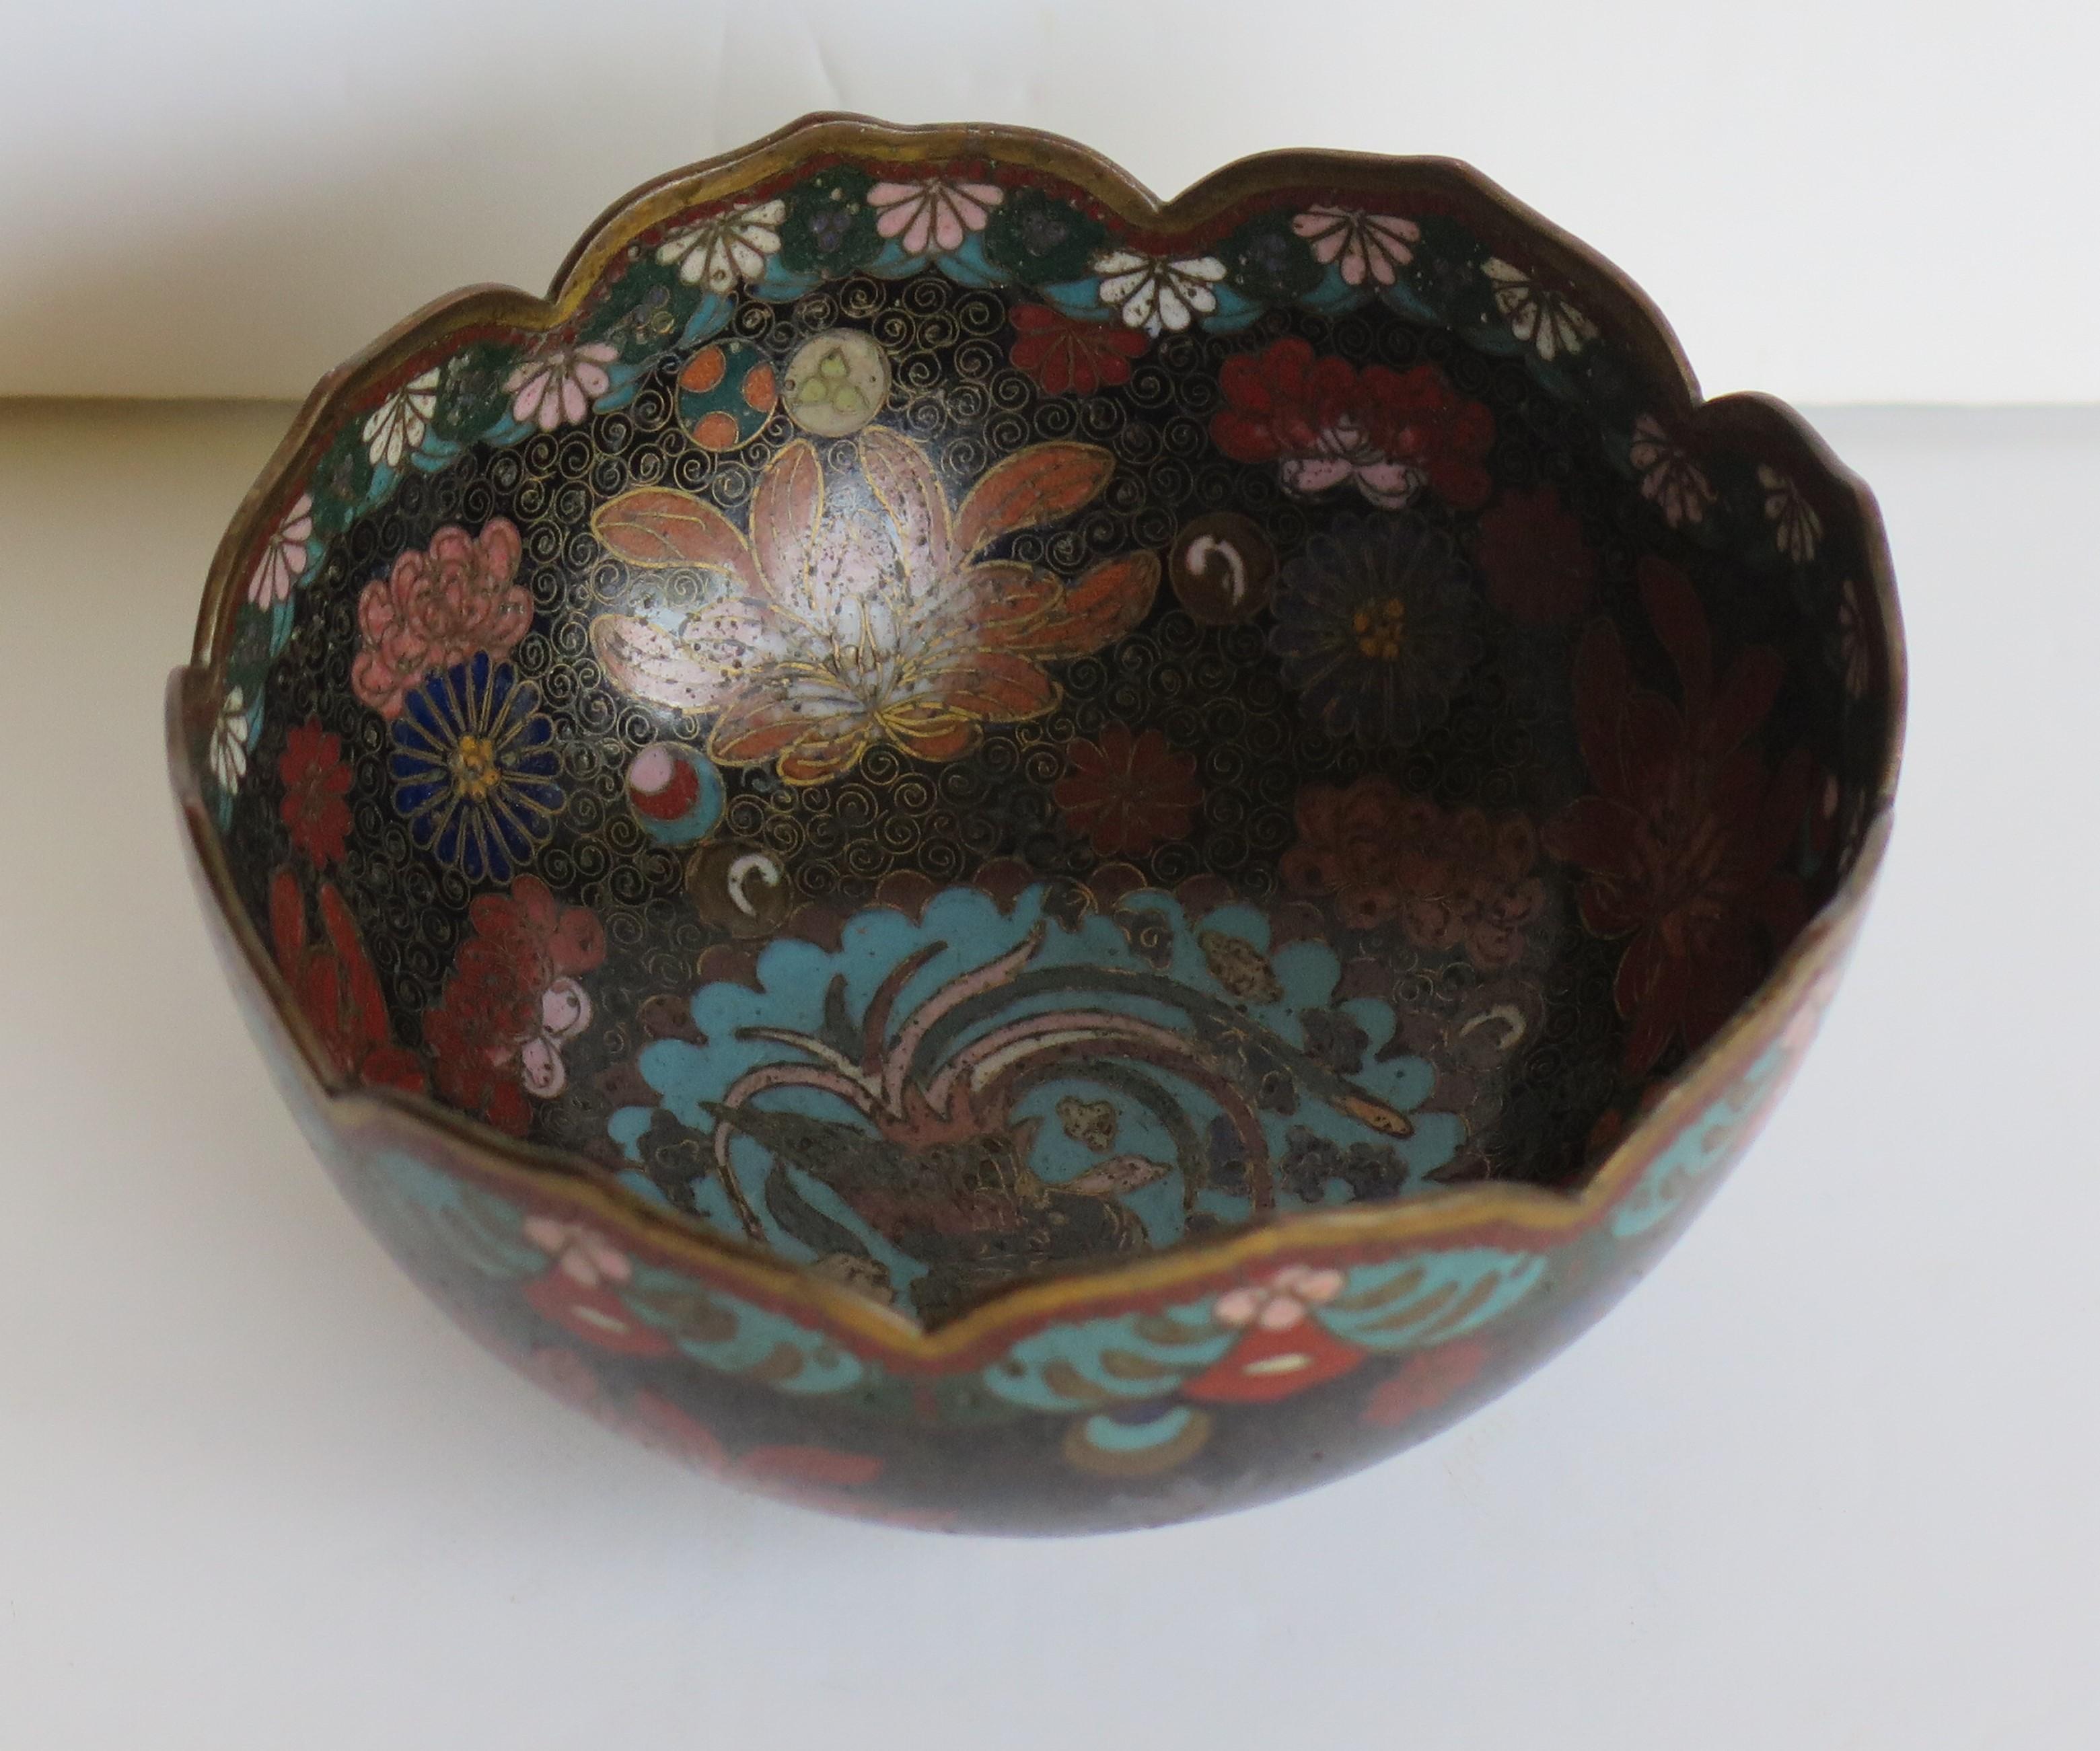 This is a very good Chinese Cloisonné bronze bowl that we date to the early/mid-19th century of the Qing dynasty.

The bowl has a wavy lappet shaped rim and sits on a low foot.

It is finely decorated inside and outside. The inside base has a